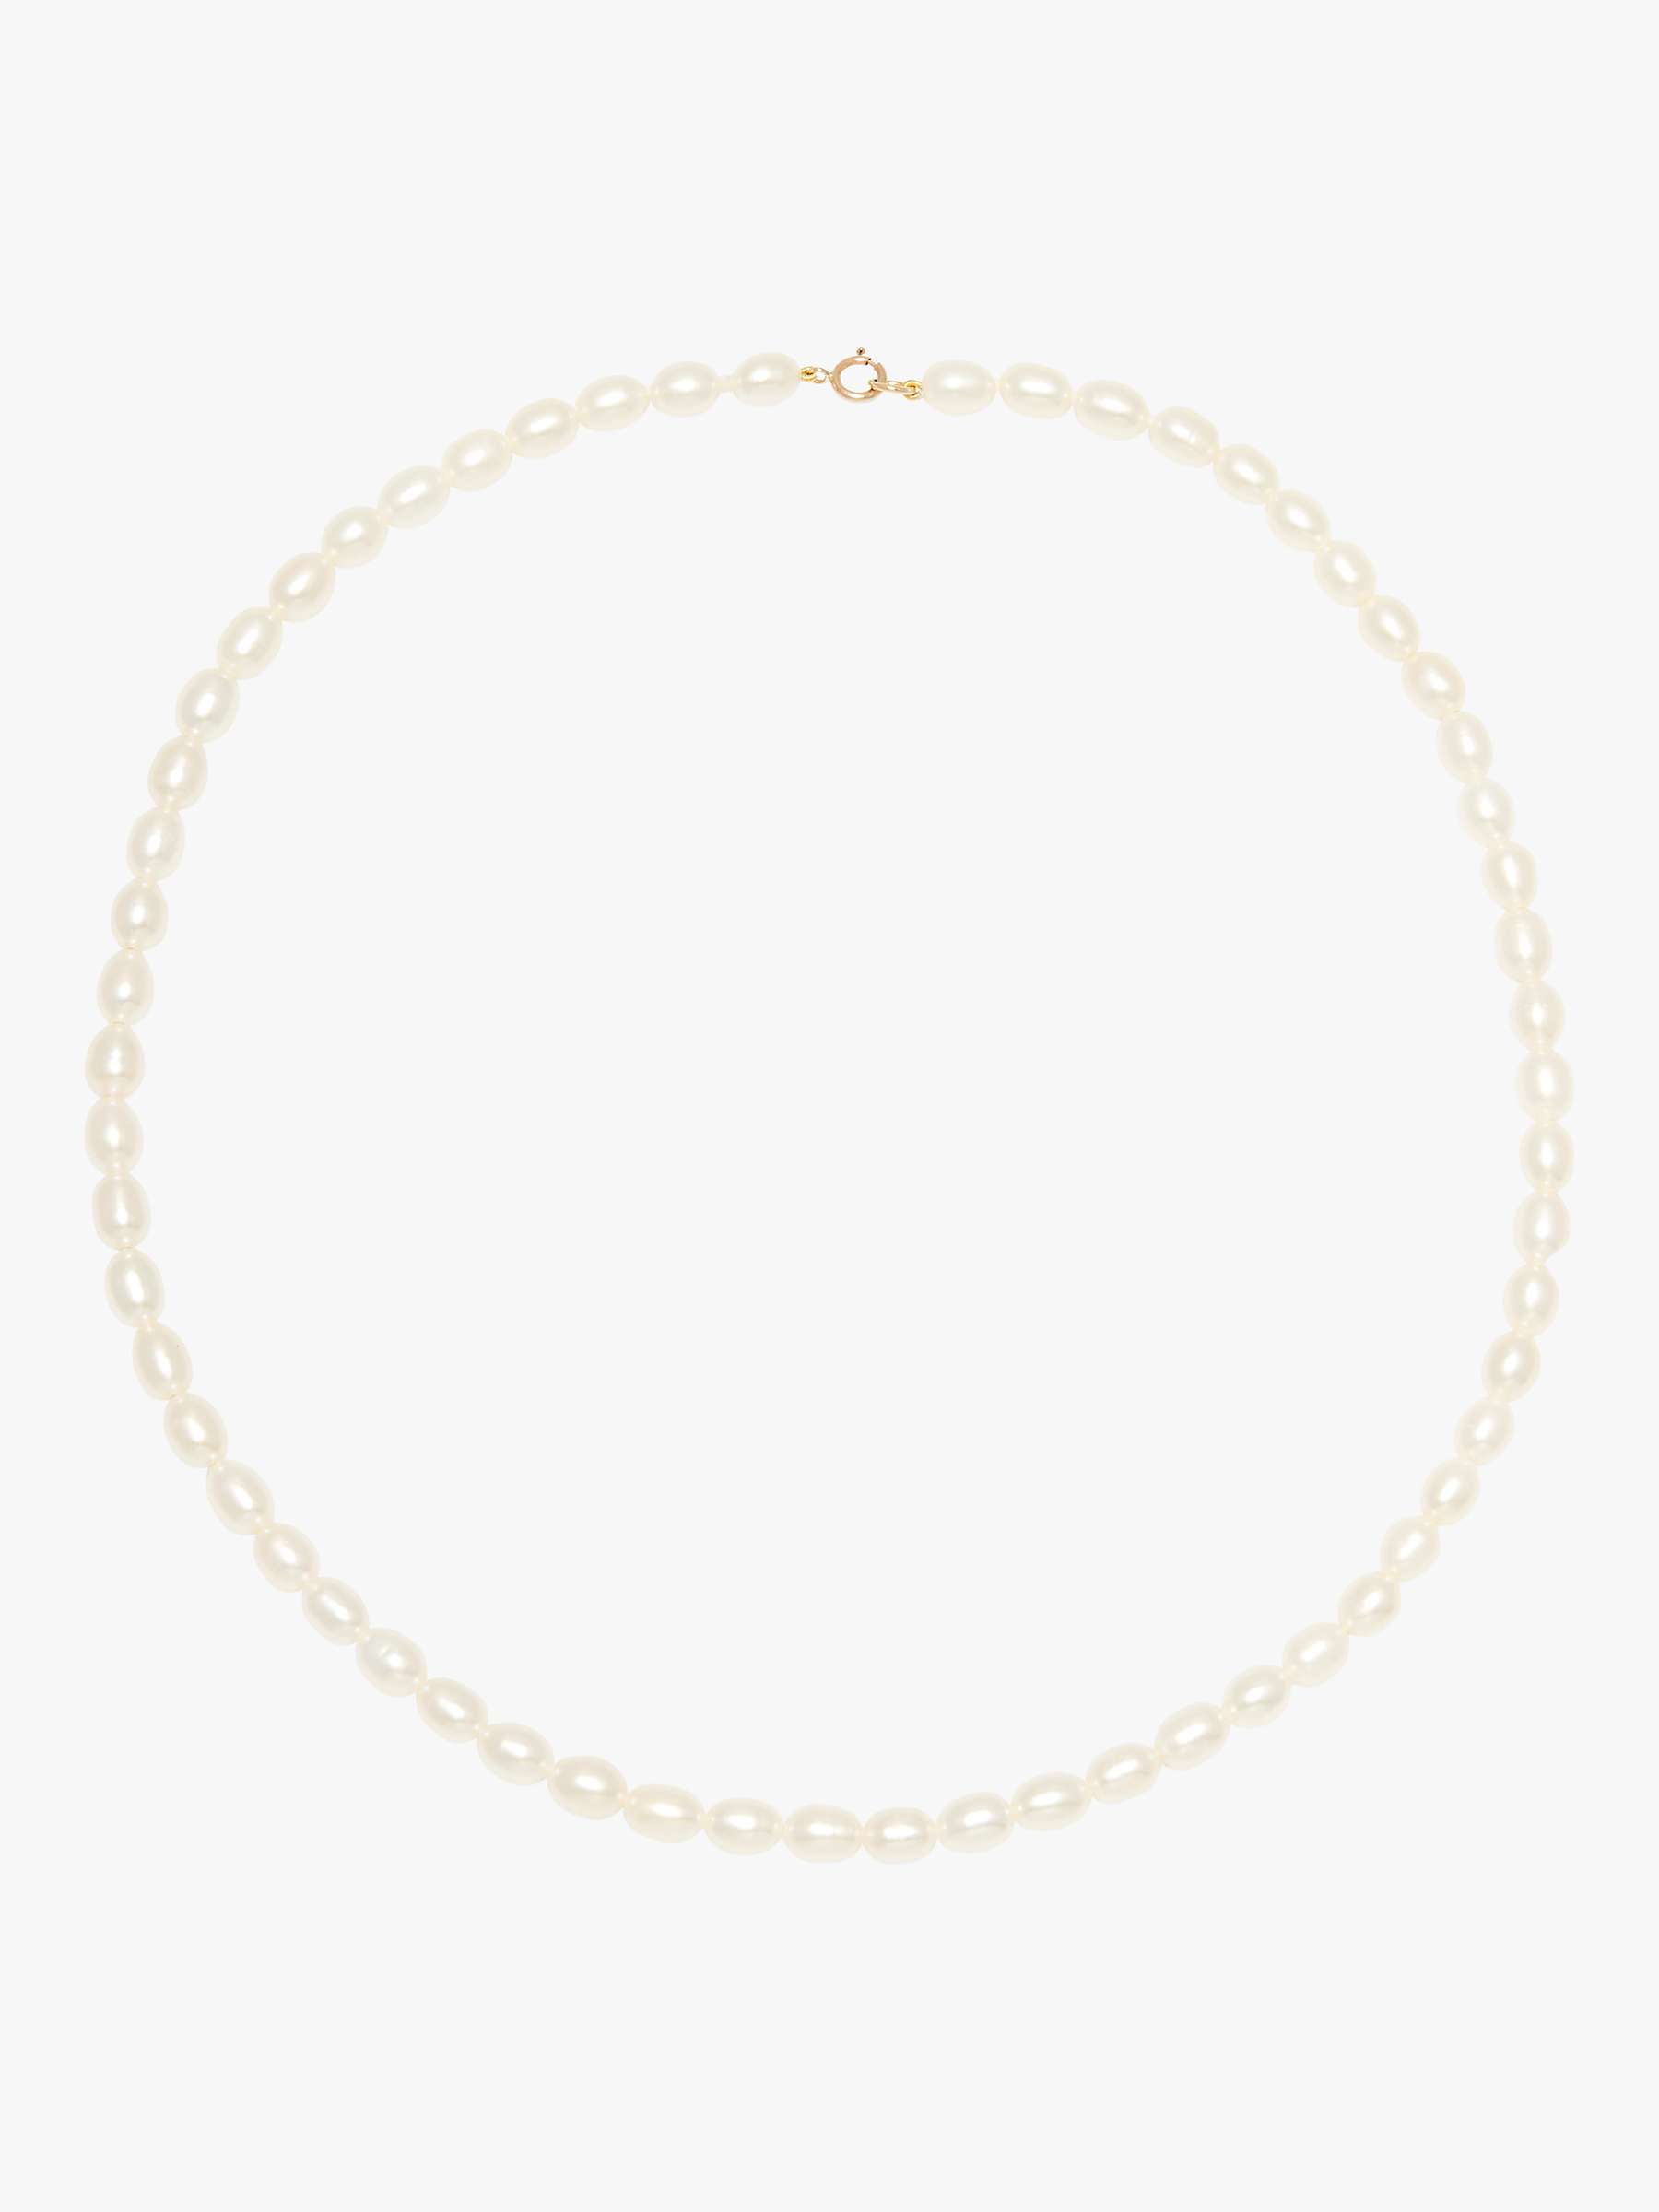 Buy A B Davis 9ct Gold Clasp Rice Pearl Necklace Online at johnlewis.com